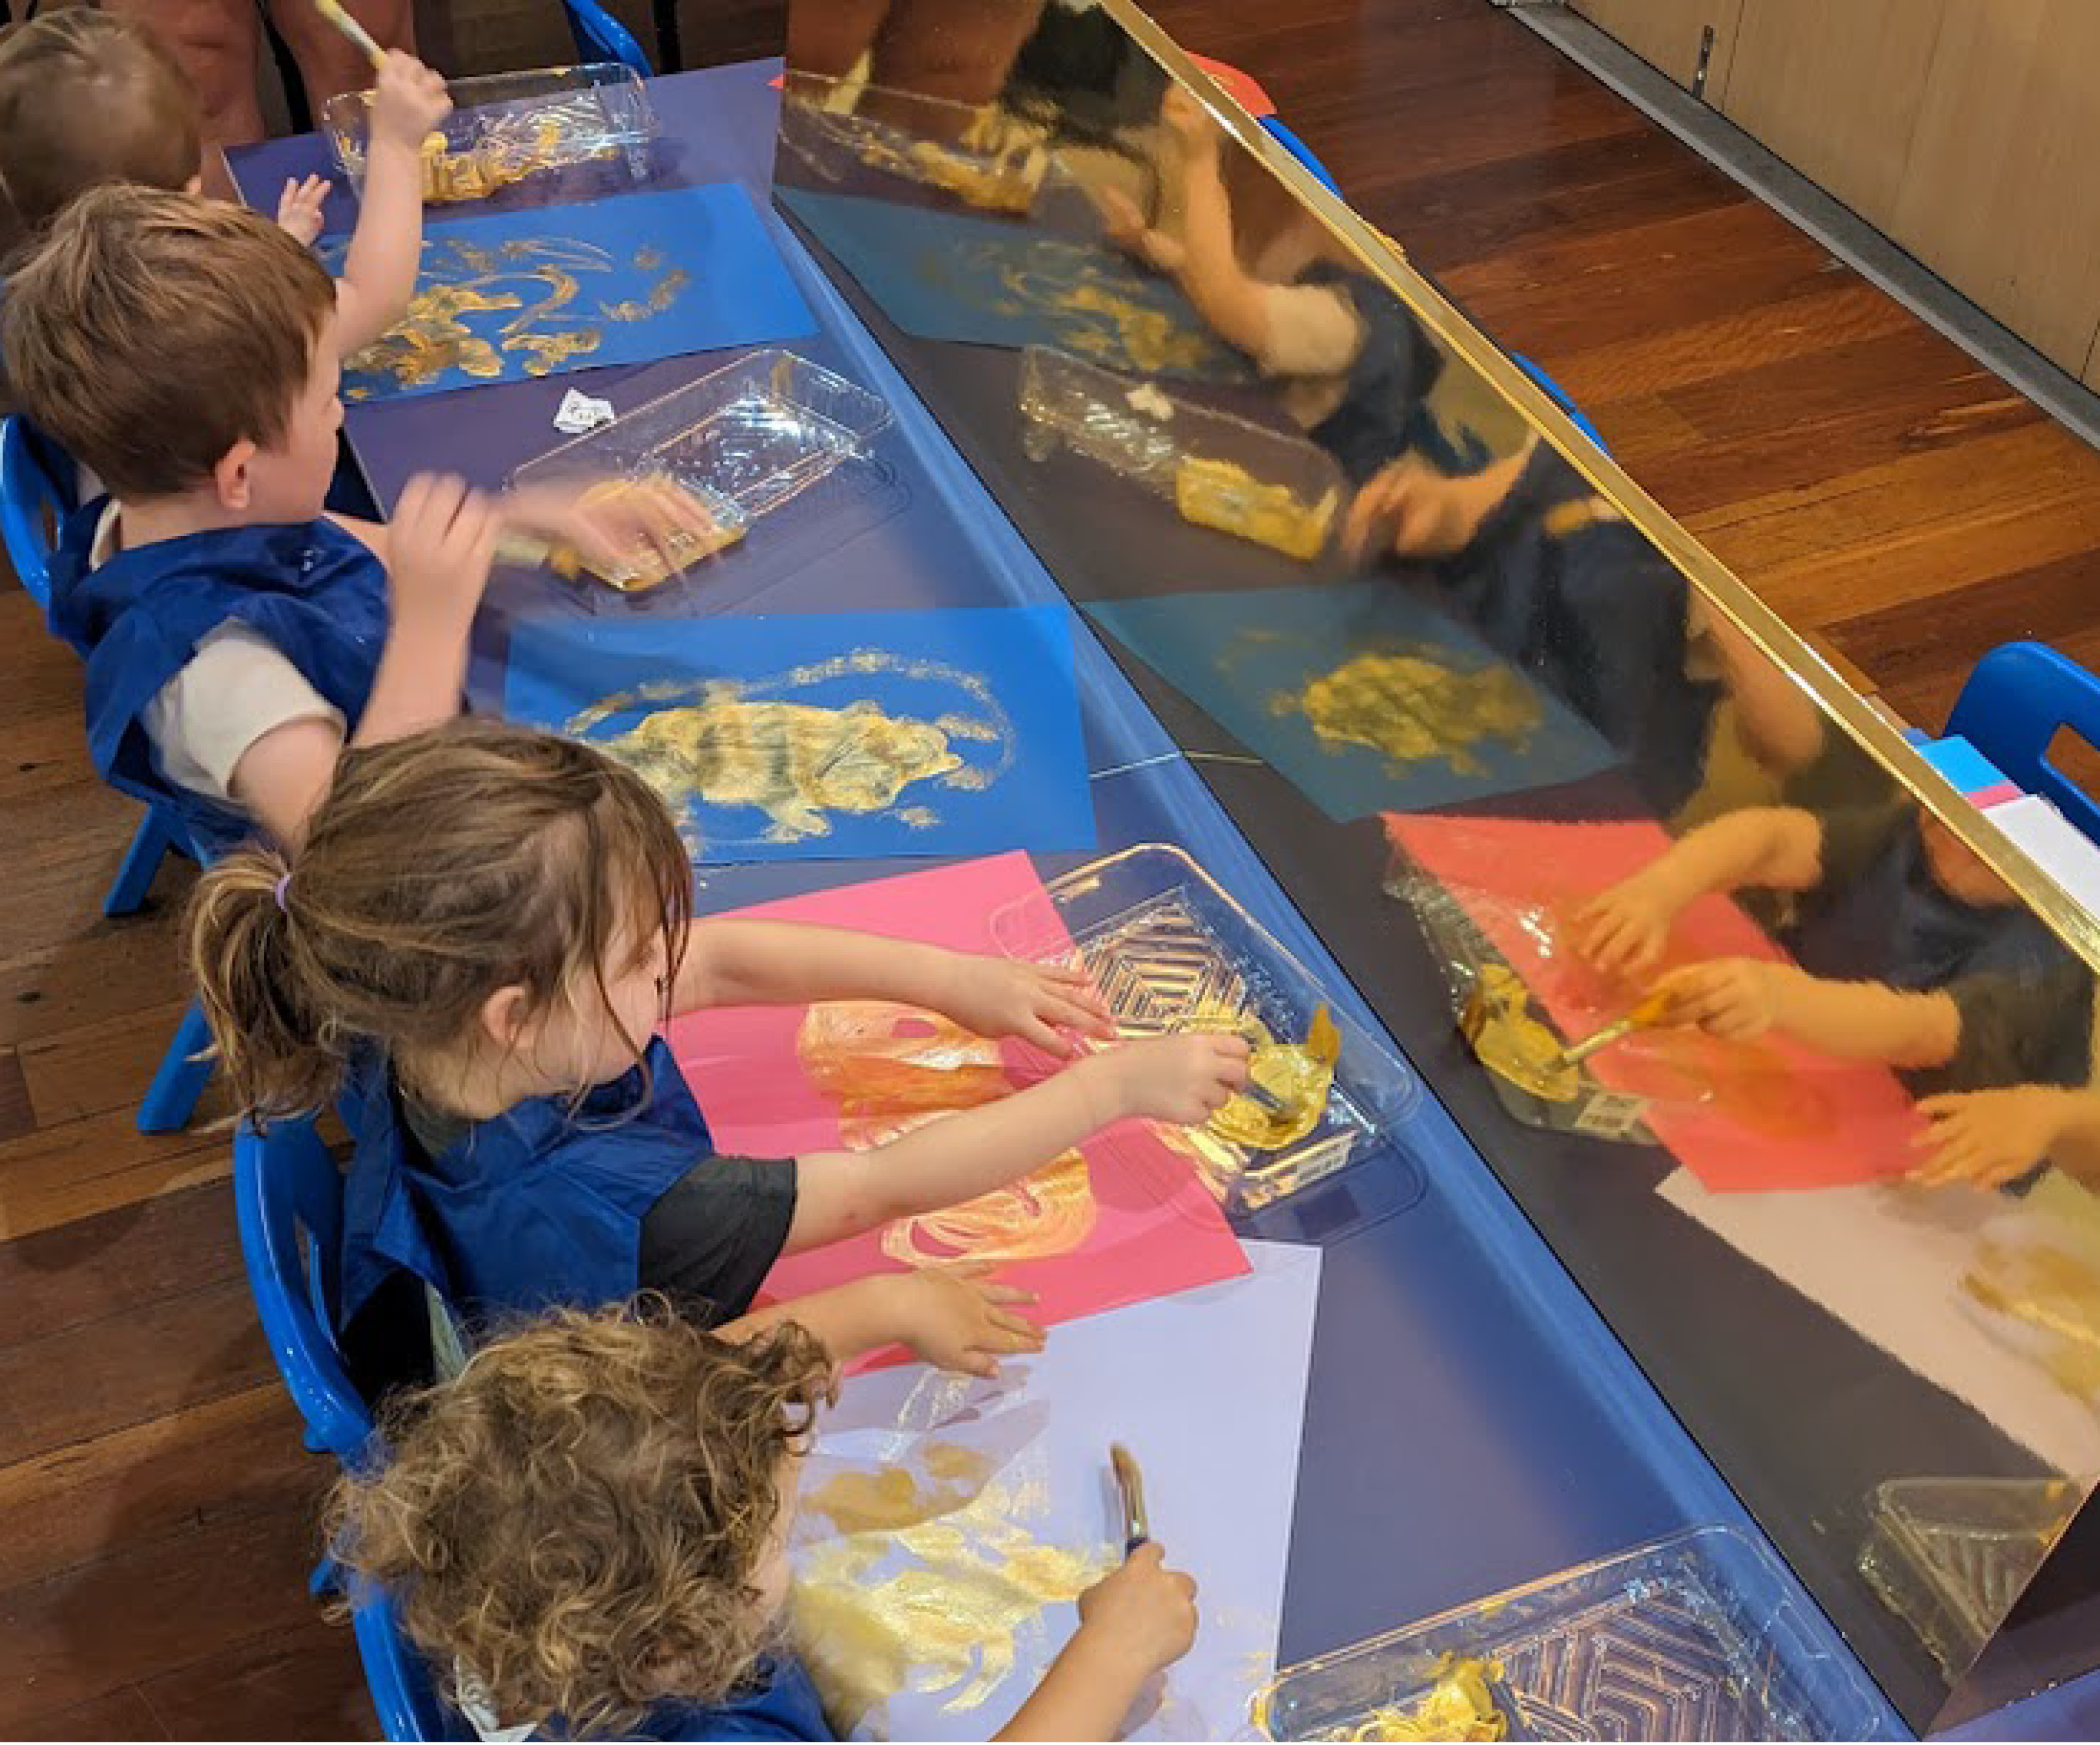 Experience the exhibitions at Hazelhurst Gallery like never before, with a special storytime for kids!